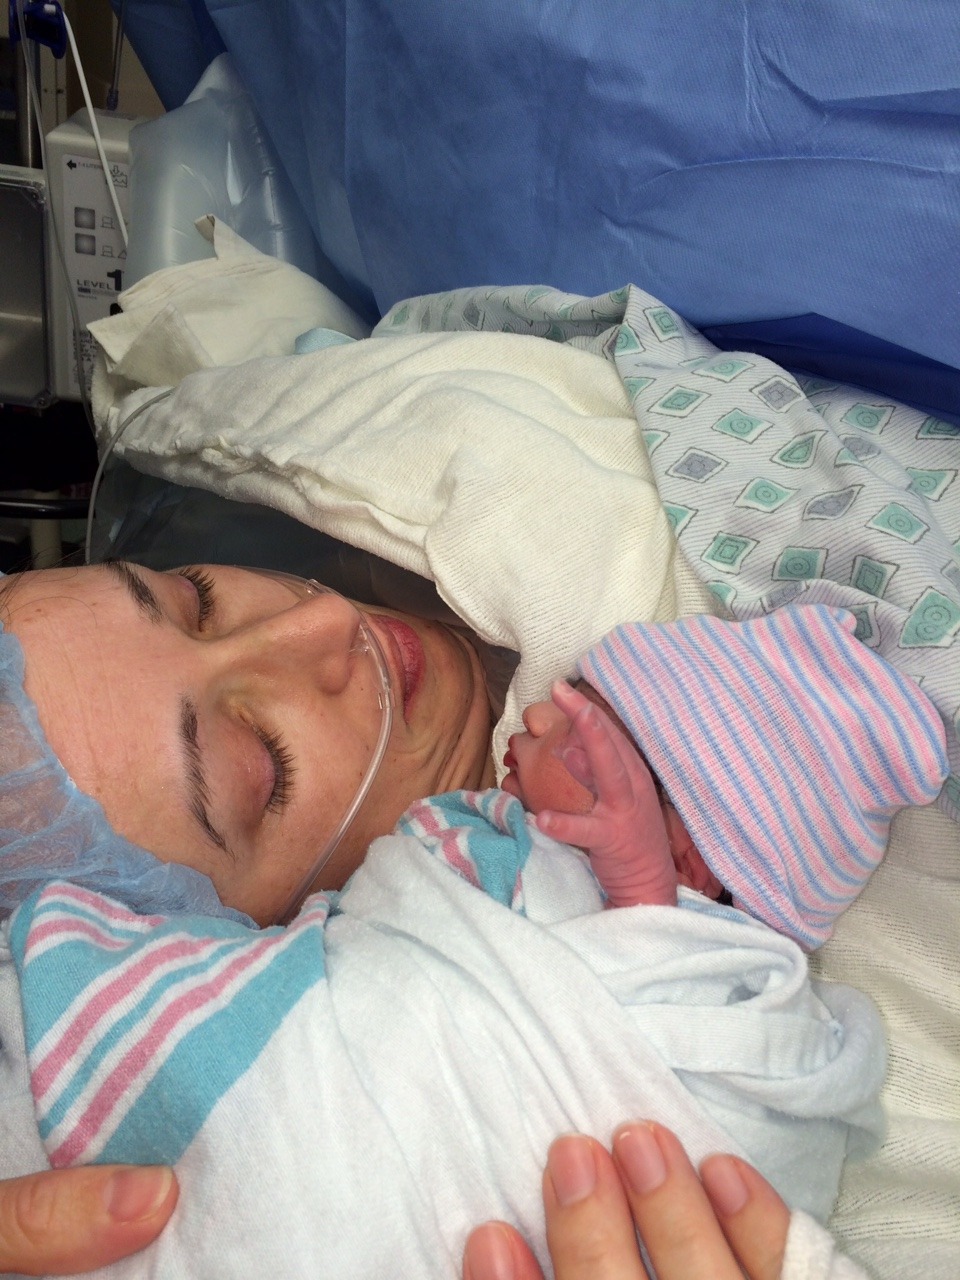 Woman holding her newborn baby in a hospital bed